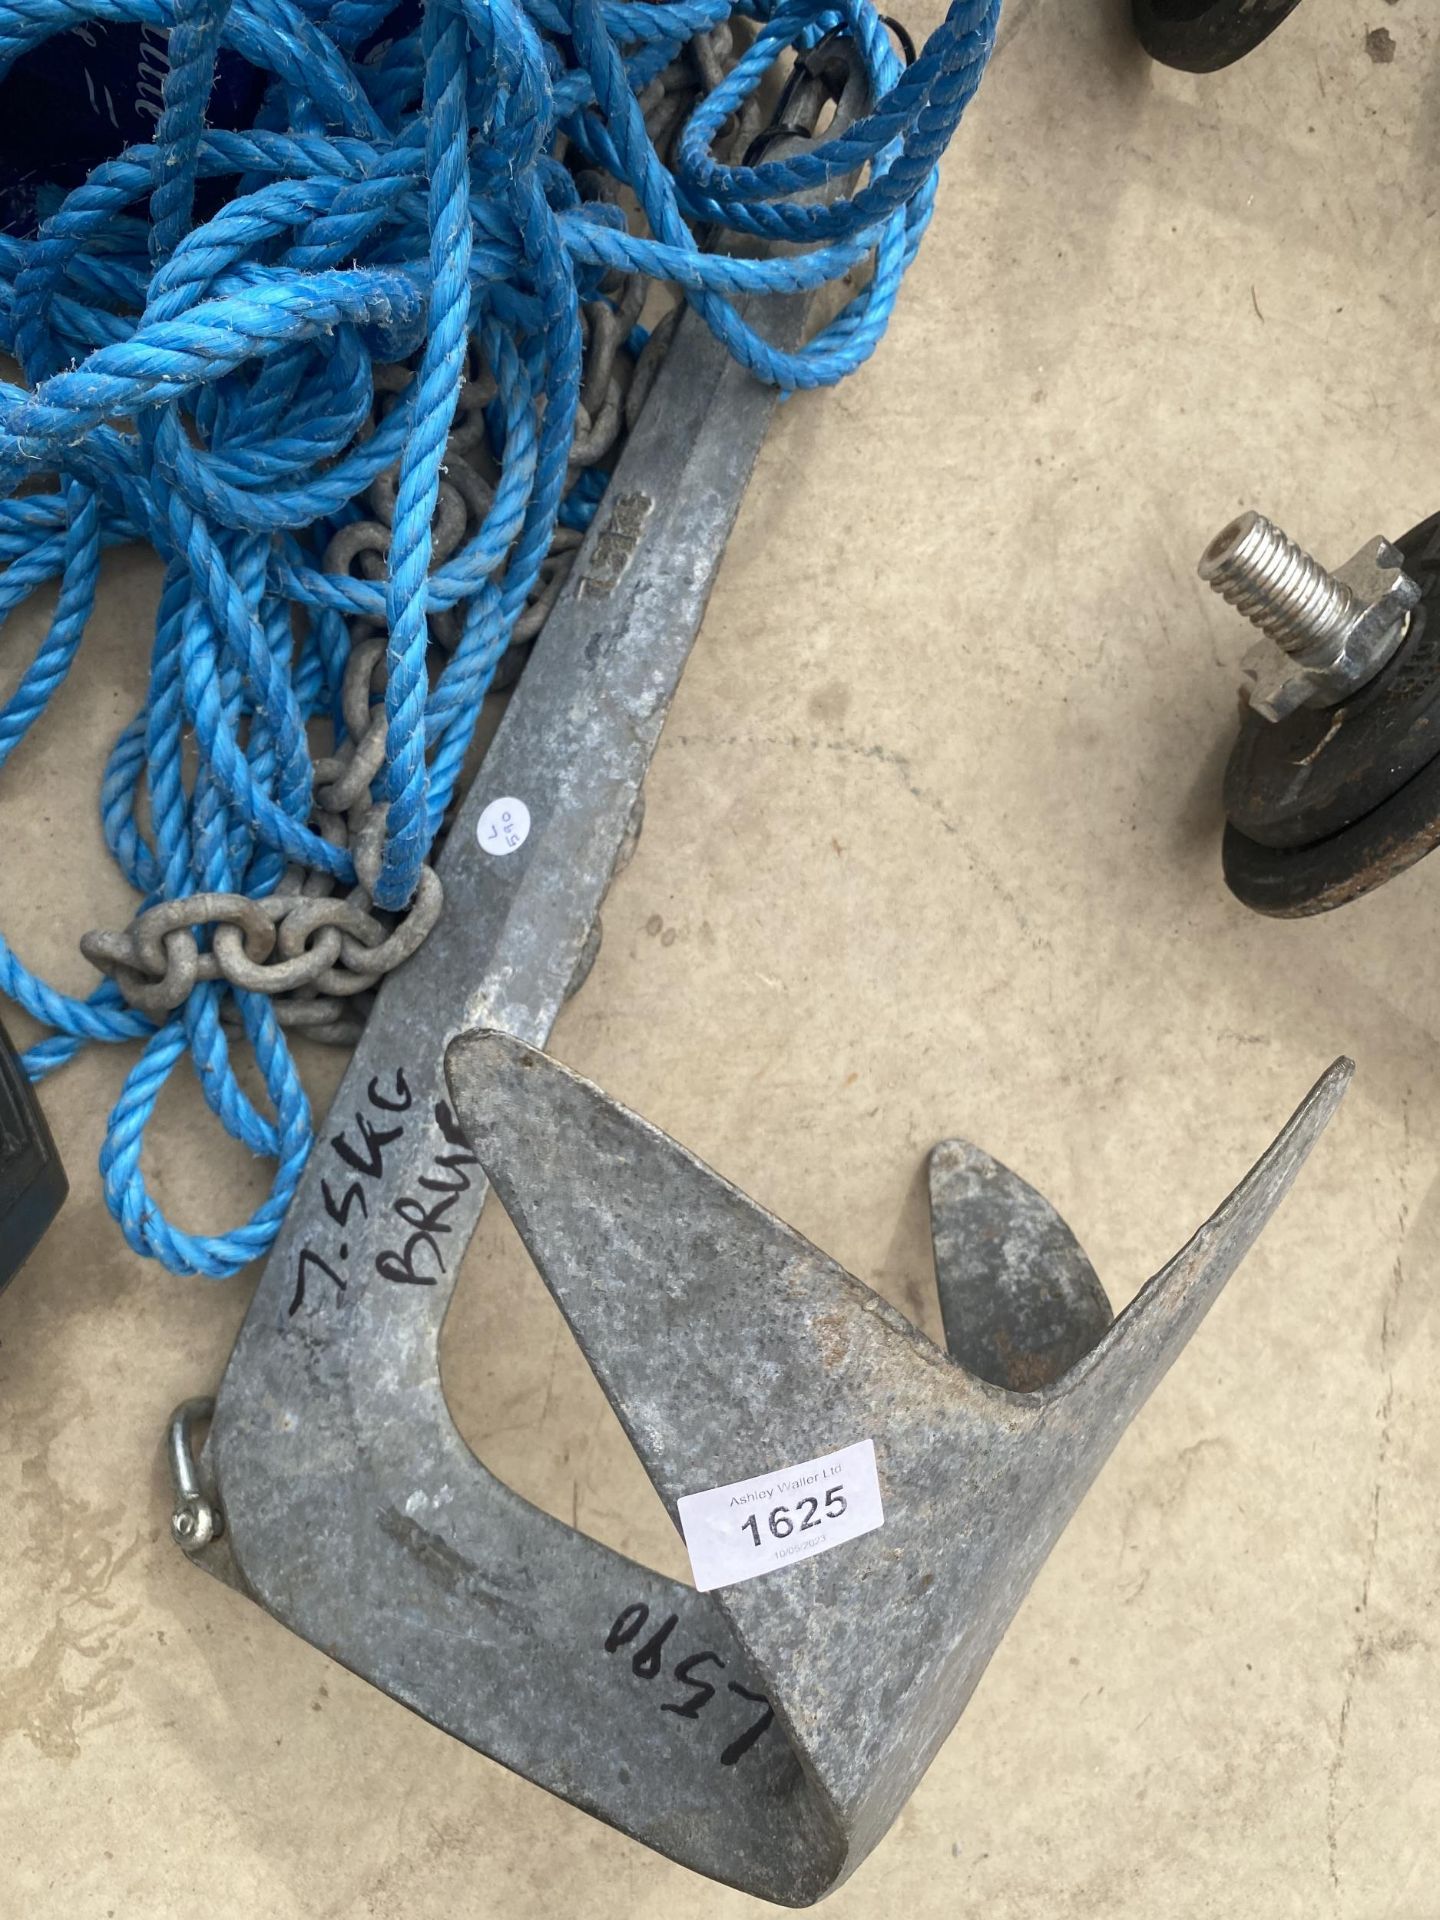 A METAL BOAT ANCHOR AND A QUANTITY OF ROPE - Image 2 of 2